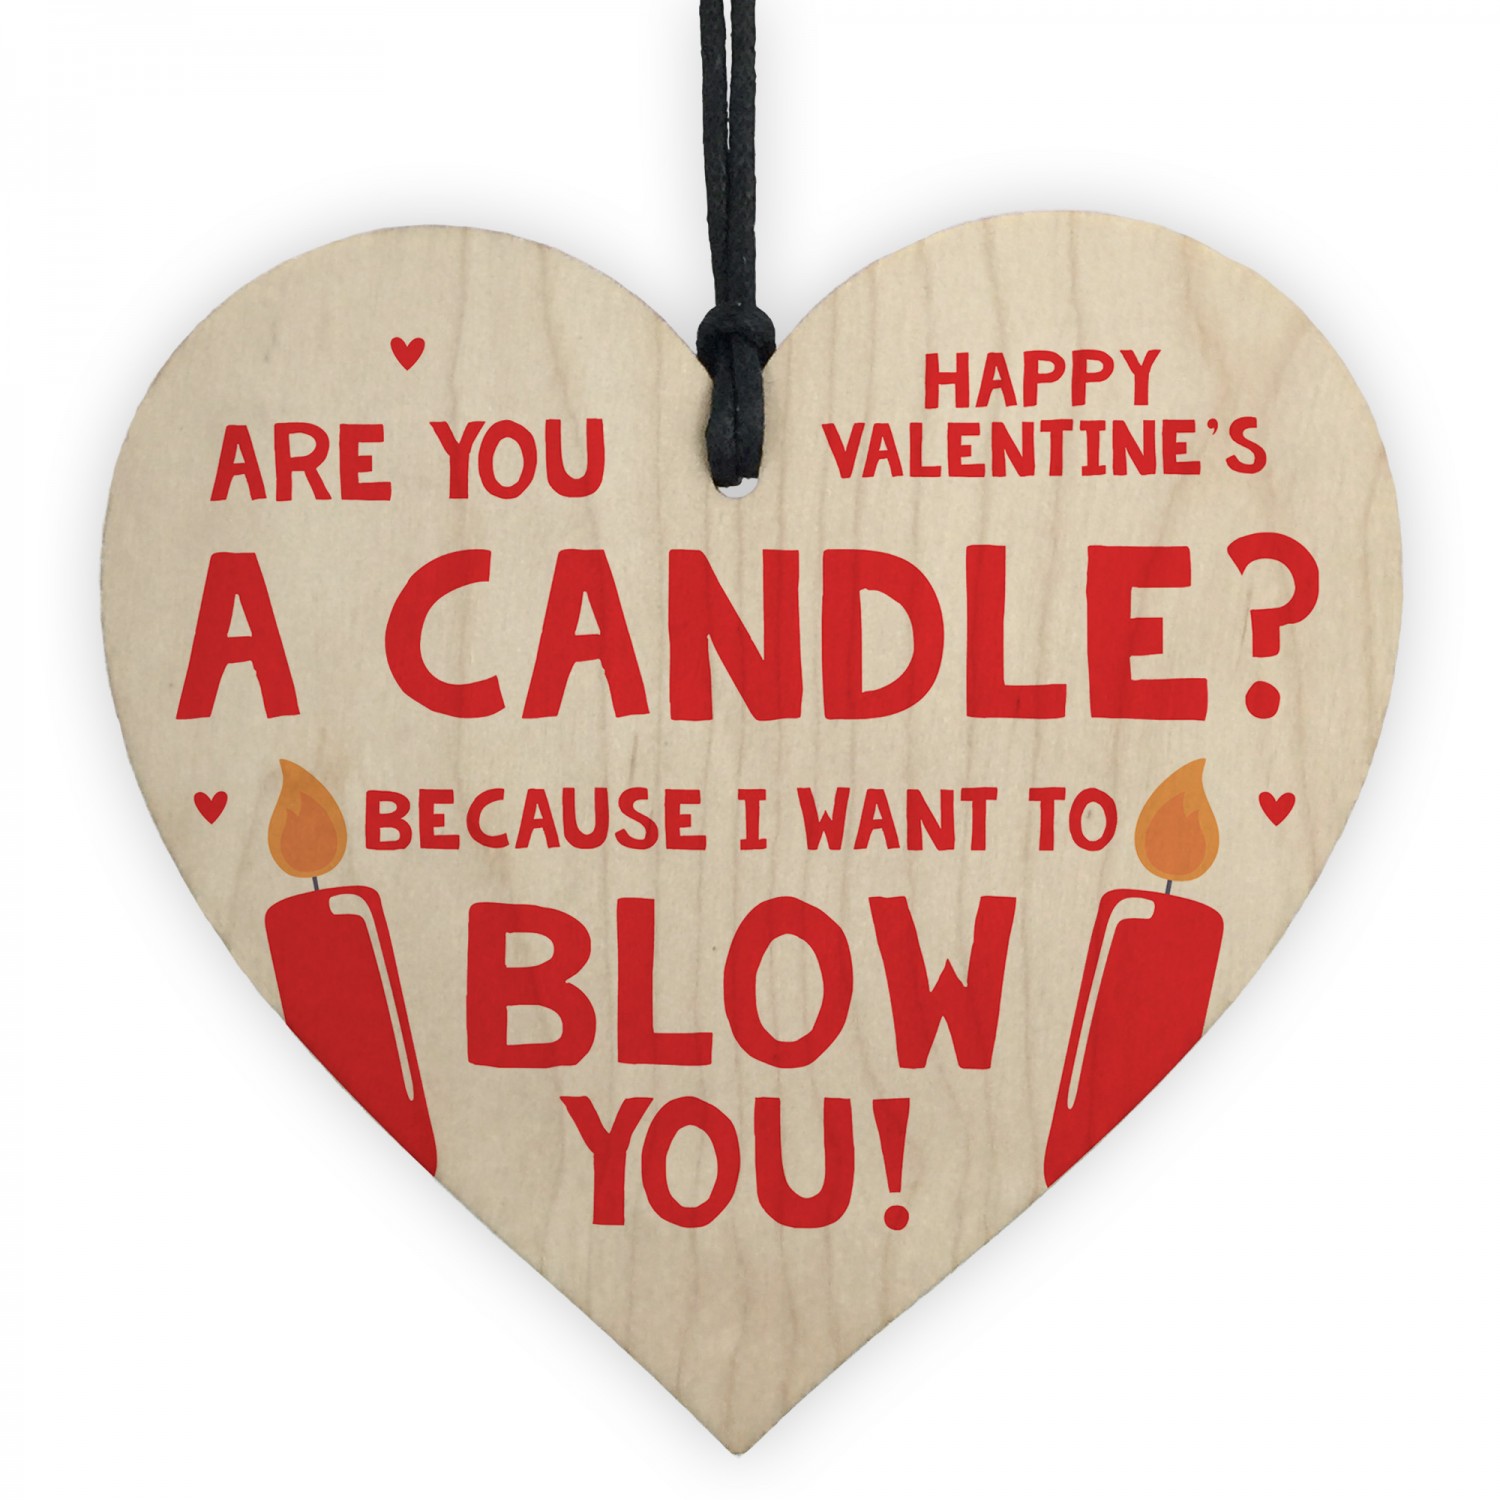 14 funny Valentine's Day gifts under £20 to make your other half laugh |  HELLO!